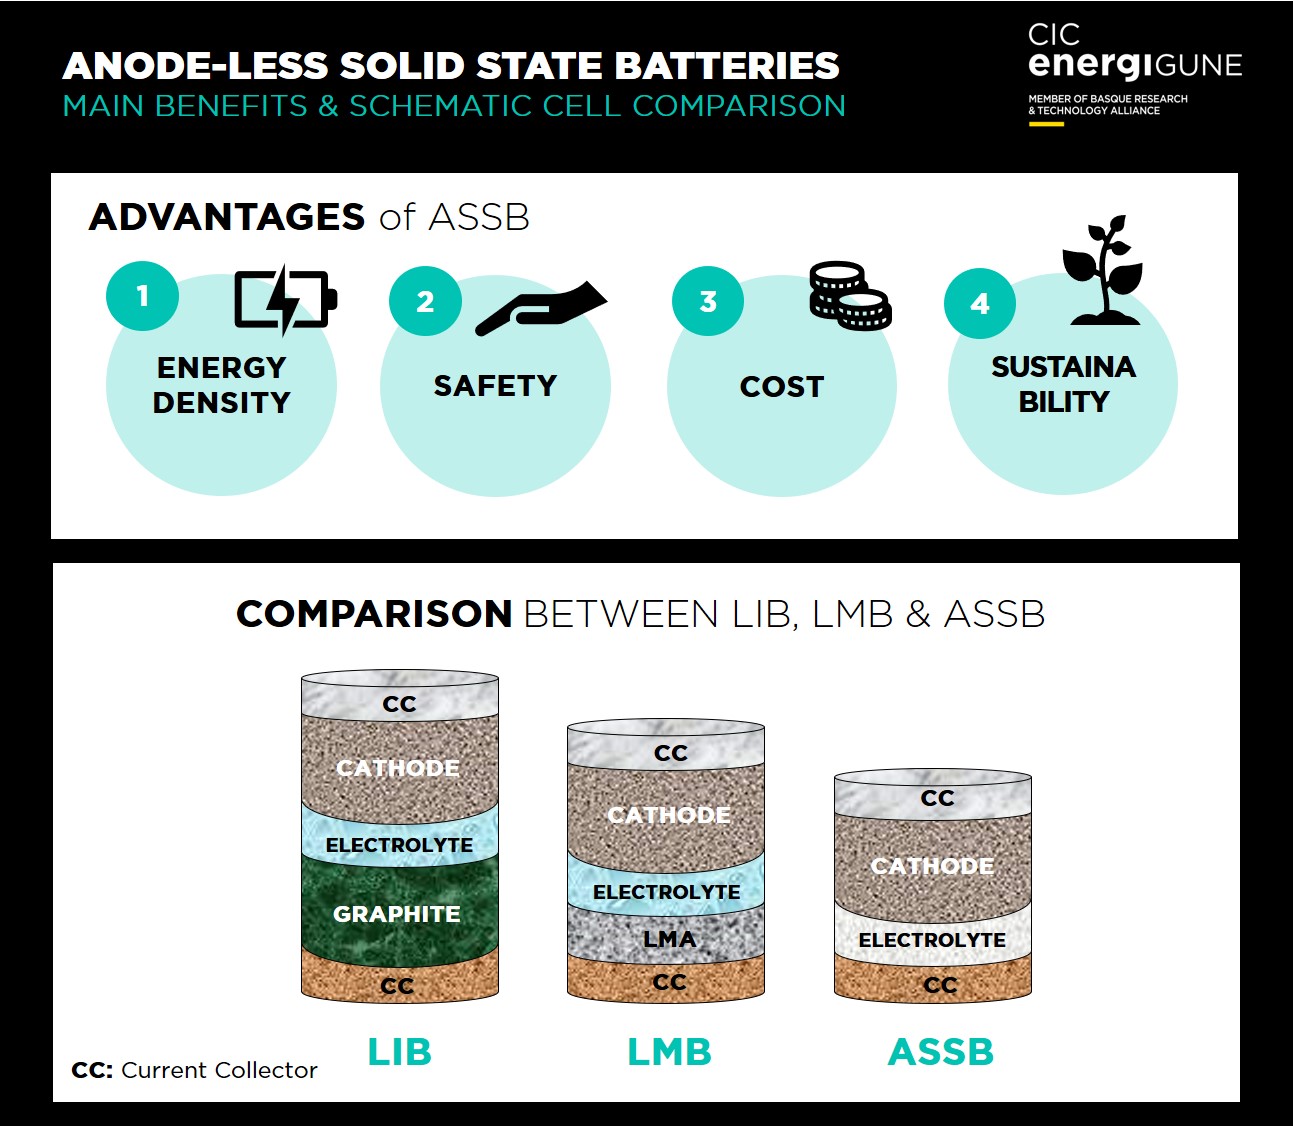 Anode-free solid-state batteries: advantages (energy density, safety, cost and sustainability) and comparative scheme between LIB, LMB and ASSB.